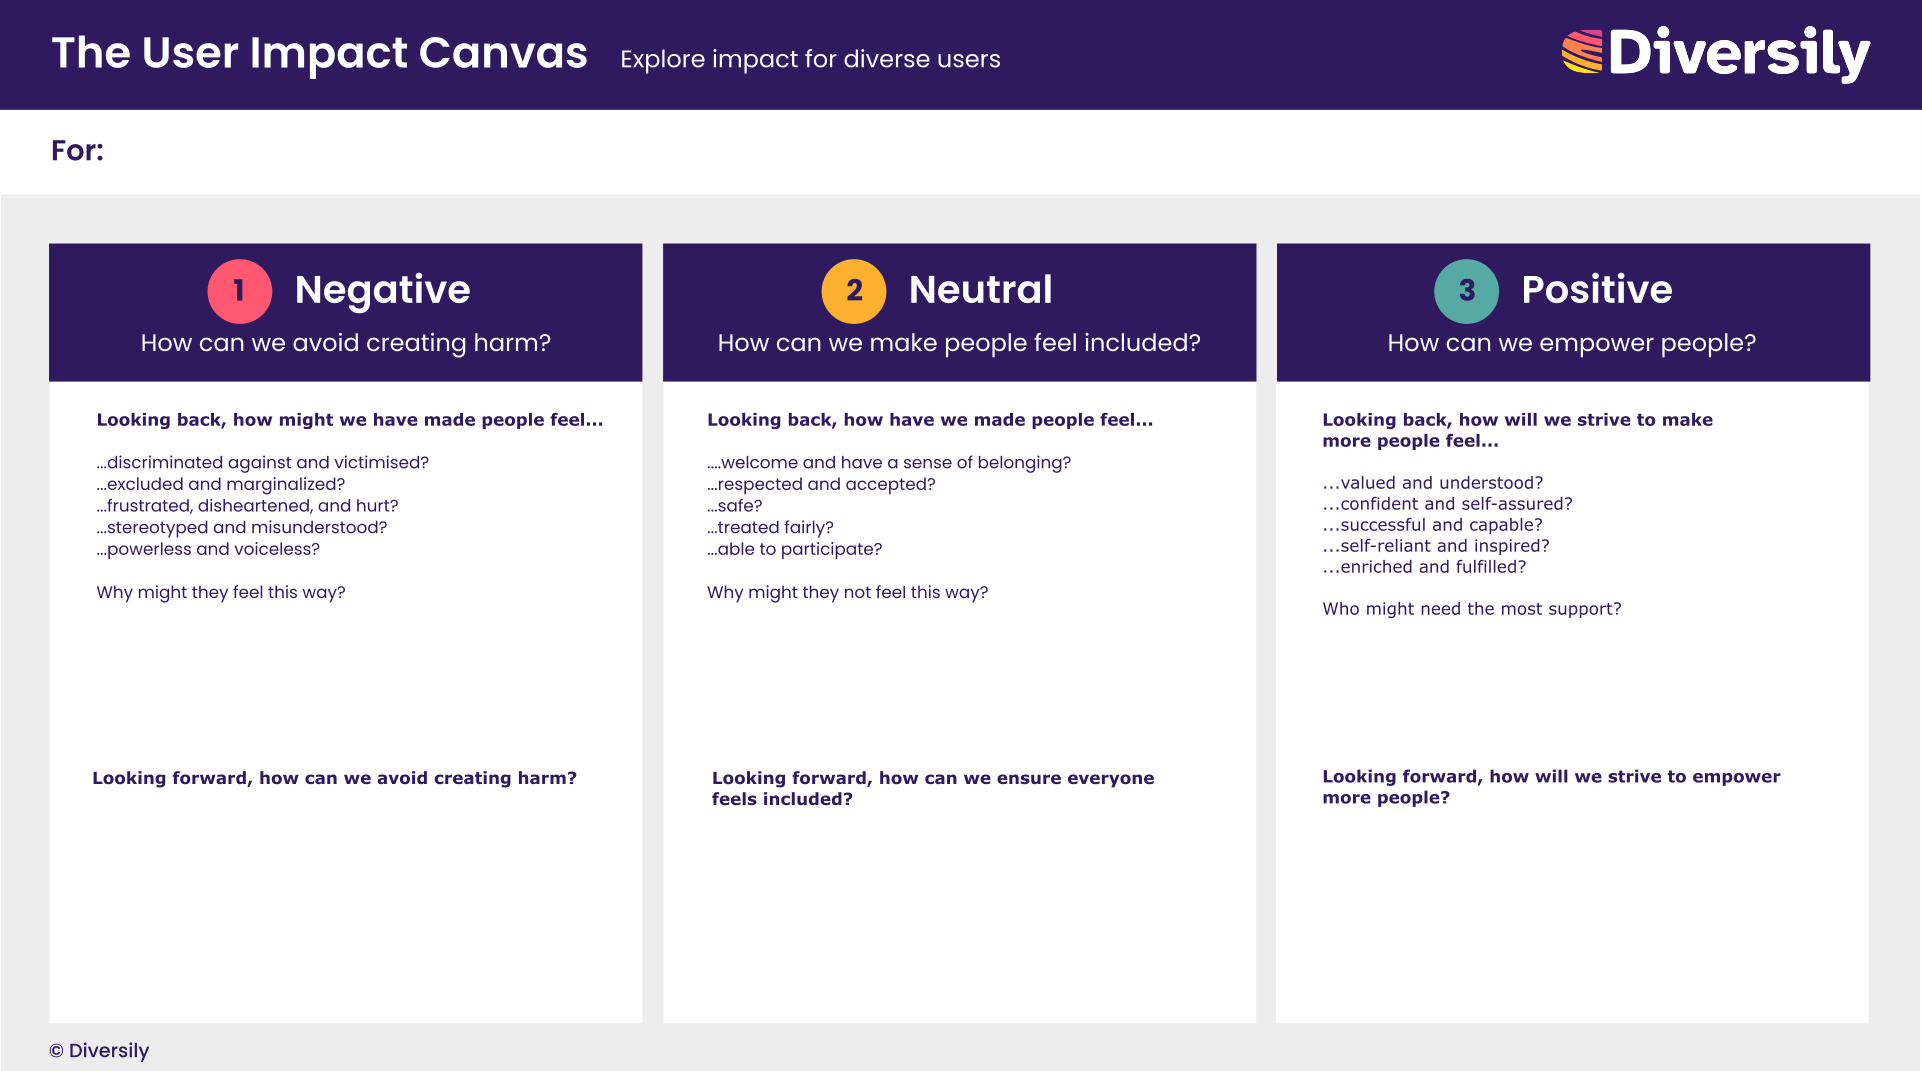 The User Impact Canvas